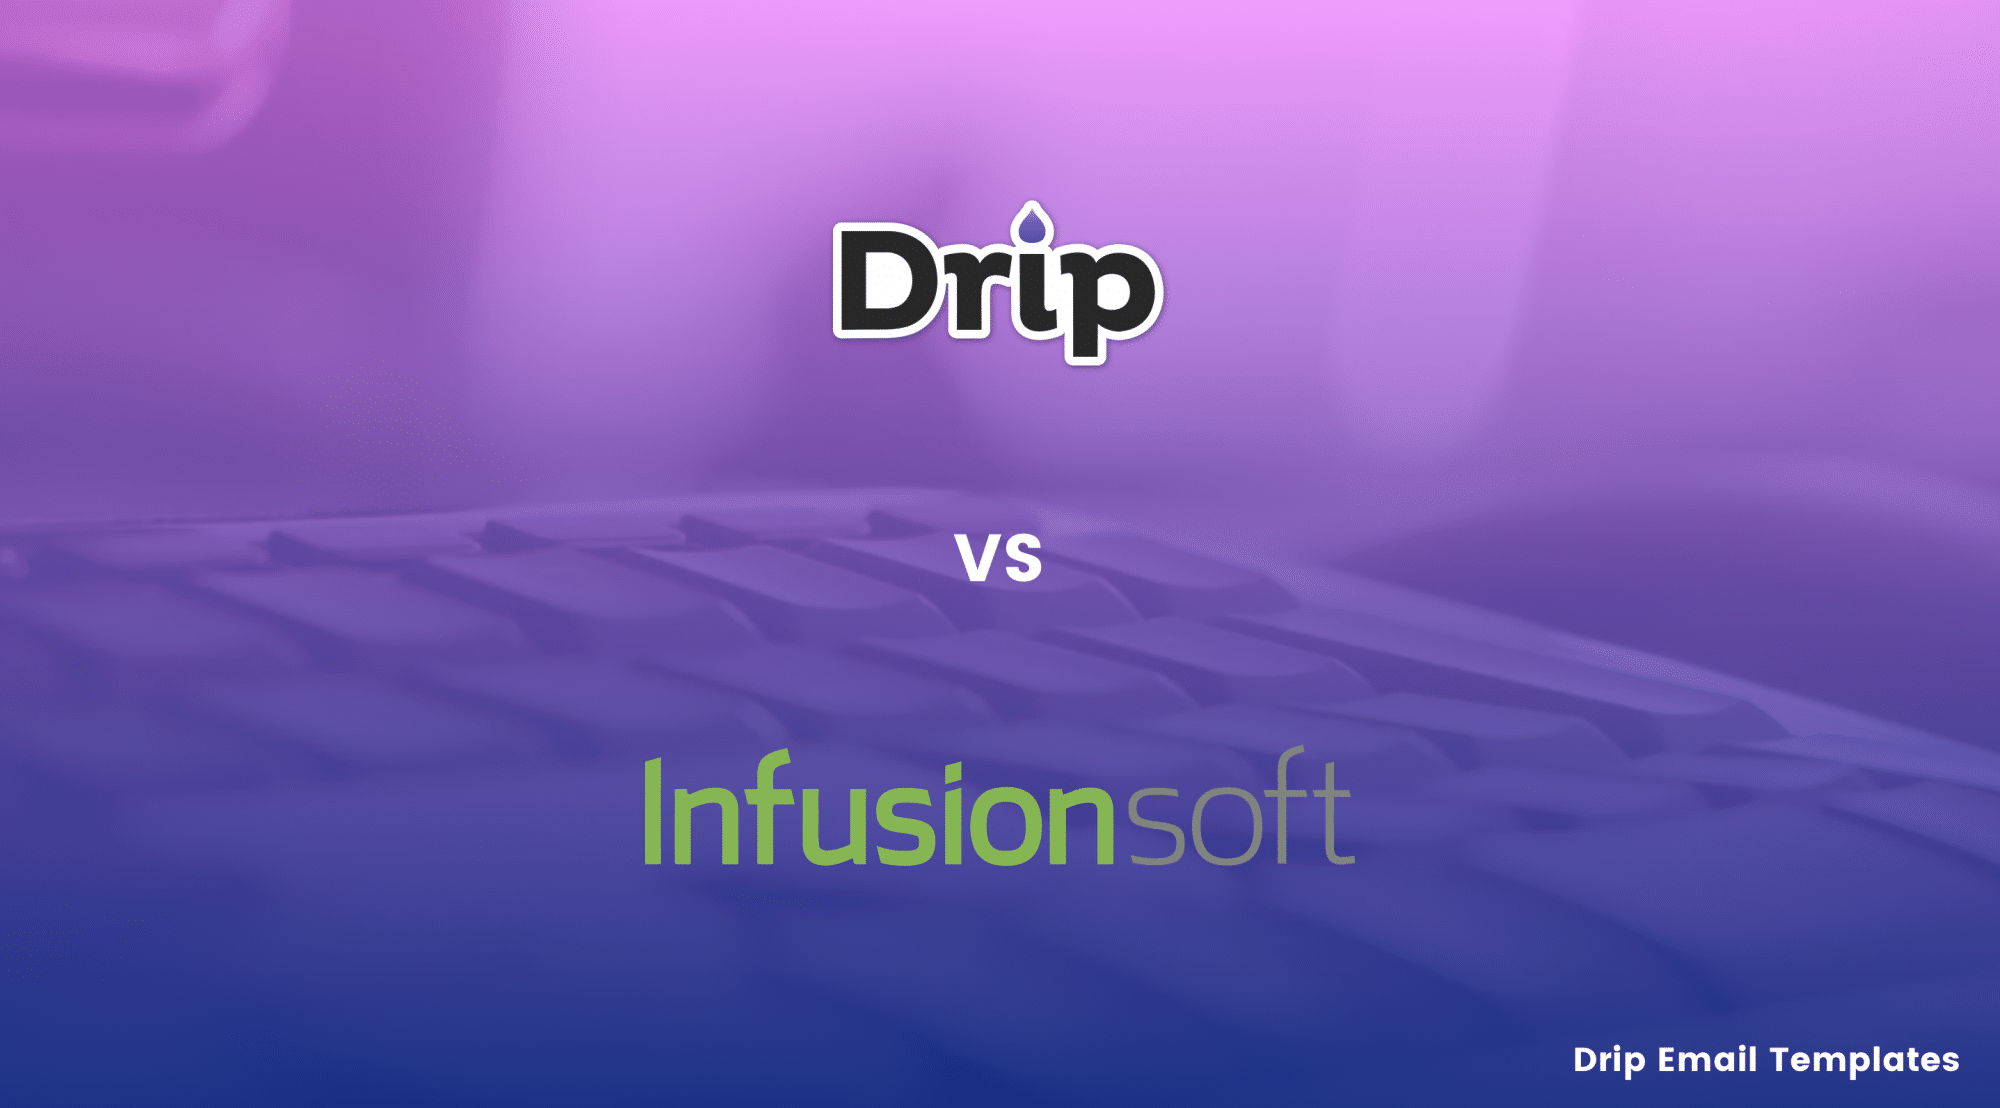 drip-vs-infusionsoft-by-drip-email-templates-drip-email-templates